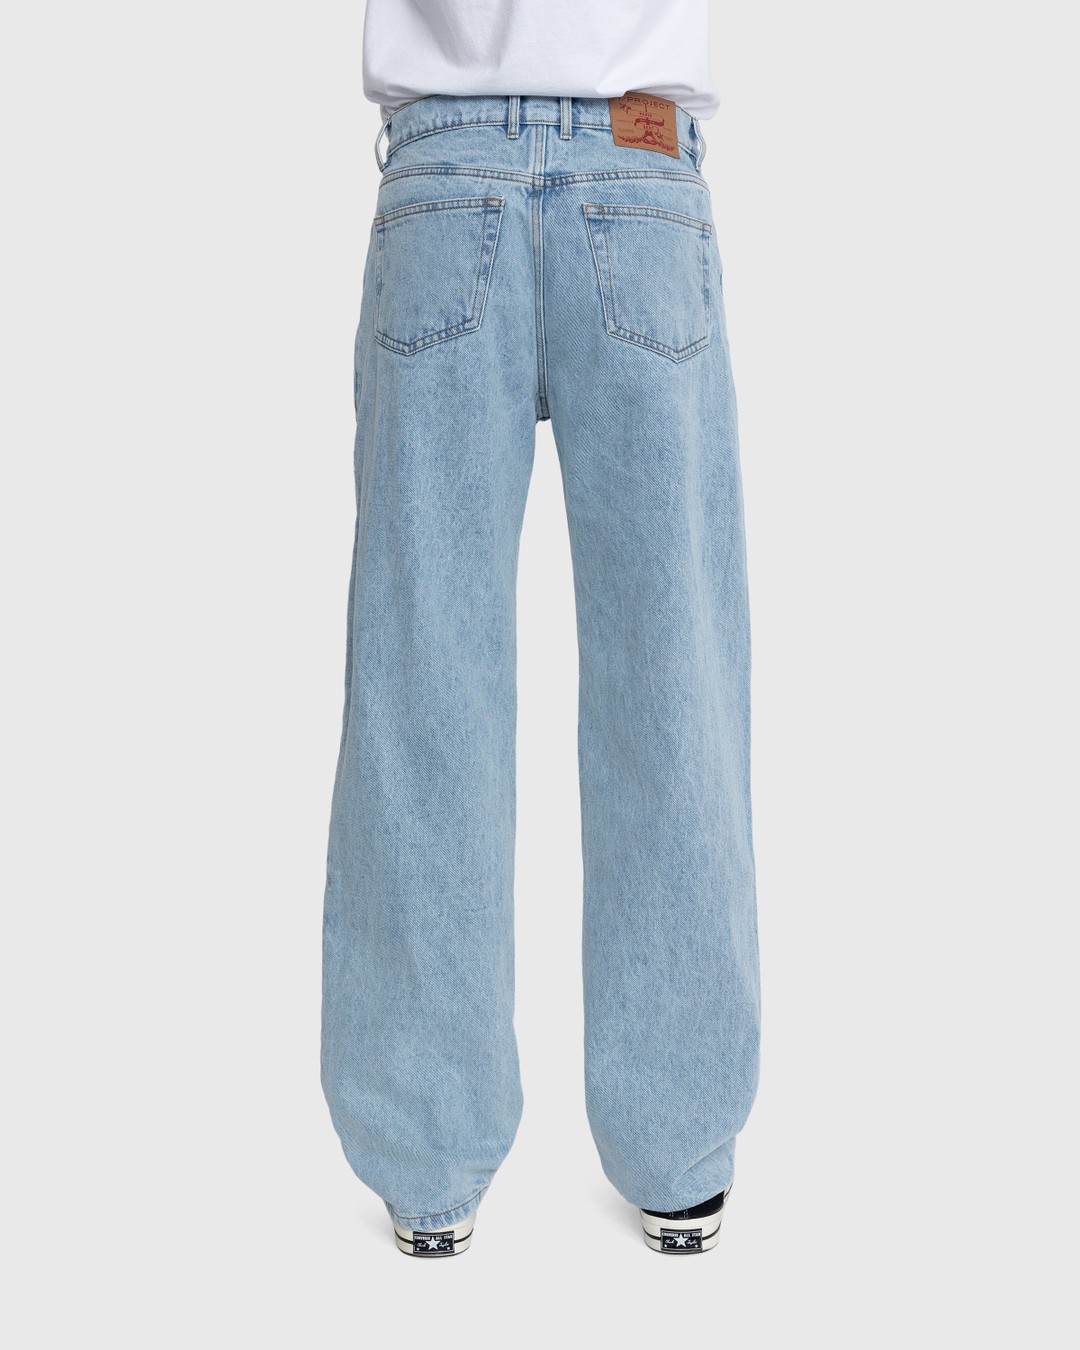 Y/Project – Pinched Logo Jeans Blue - Pants - Blue - Image 4